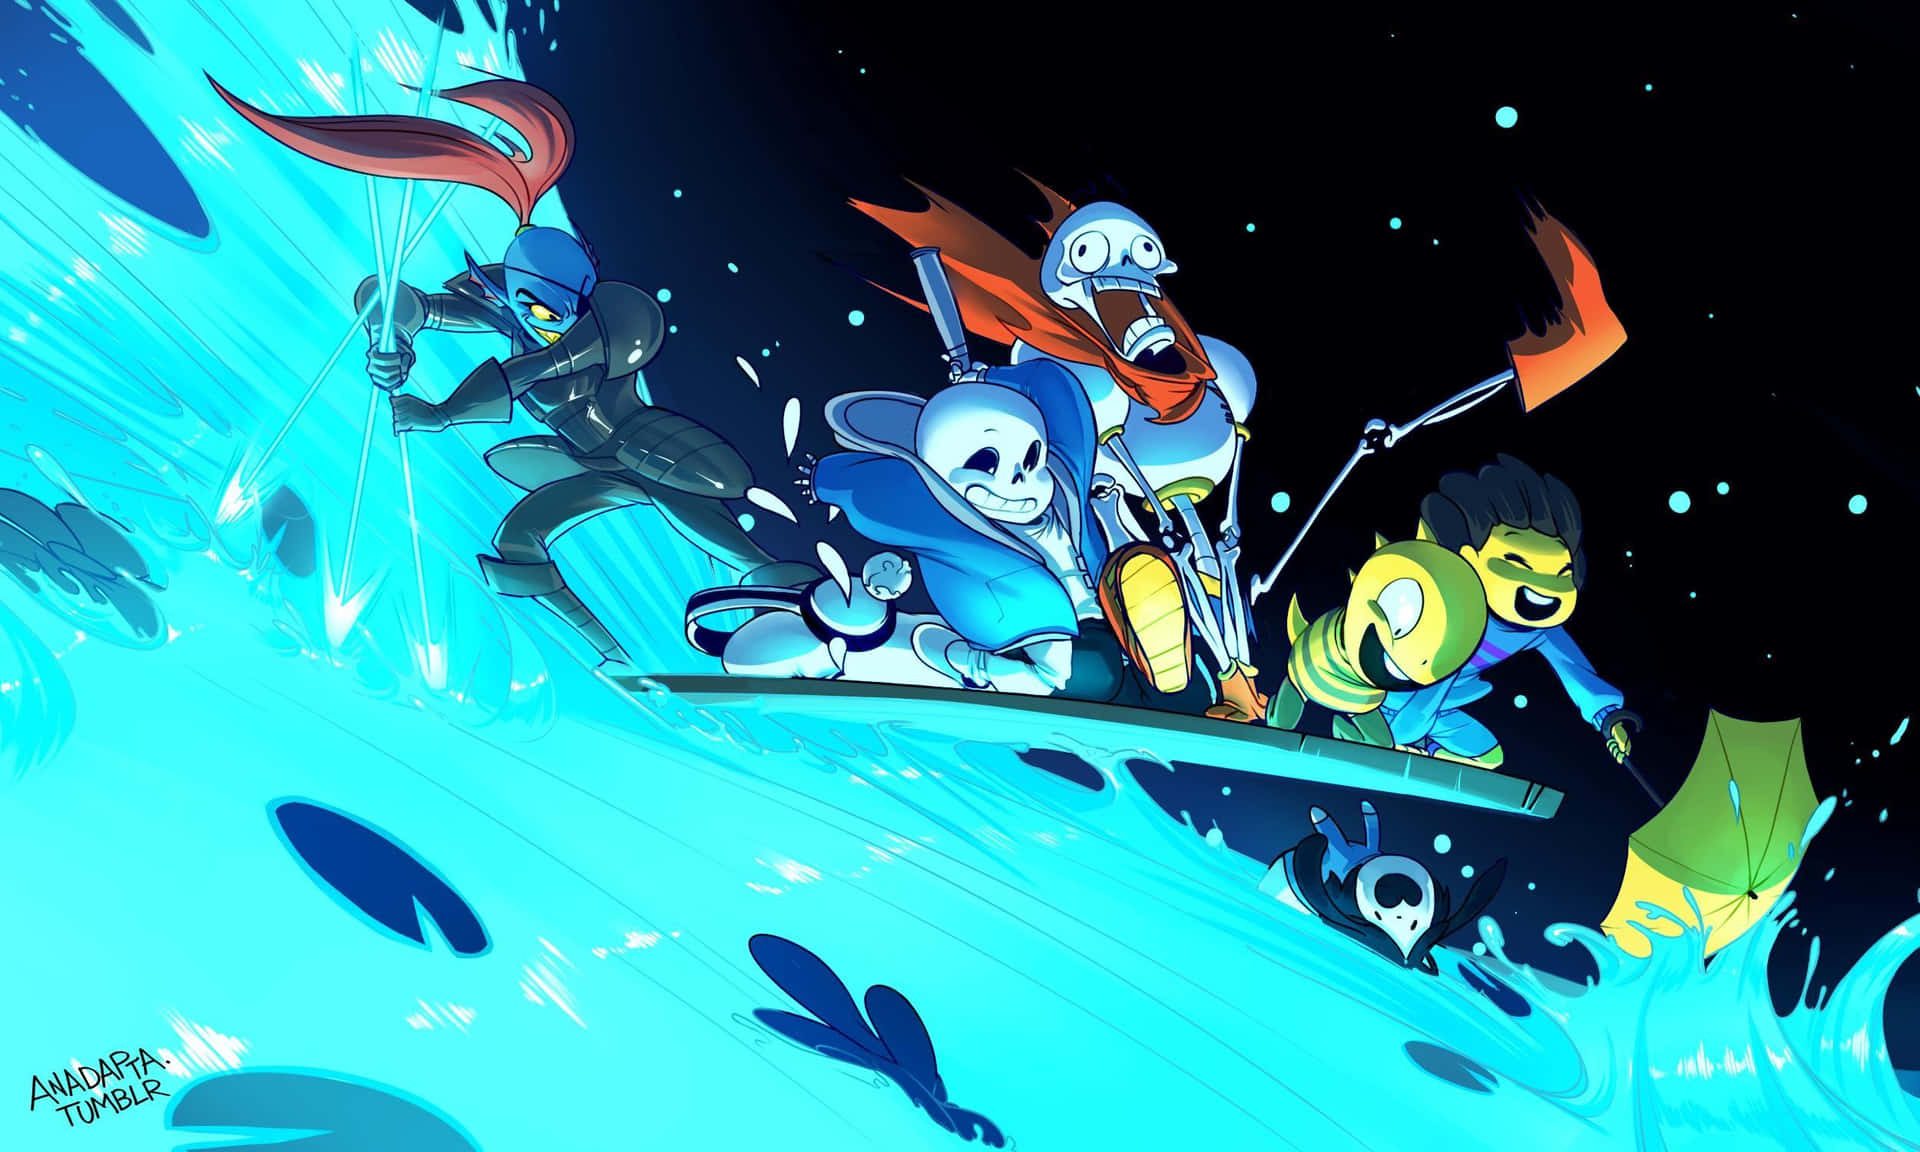 Dive into the world of Undertale with this stunning desktop background Wallpaper